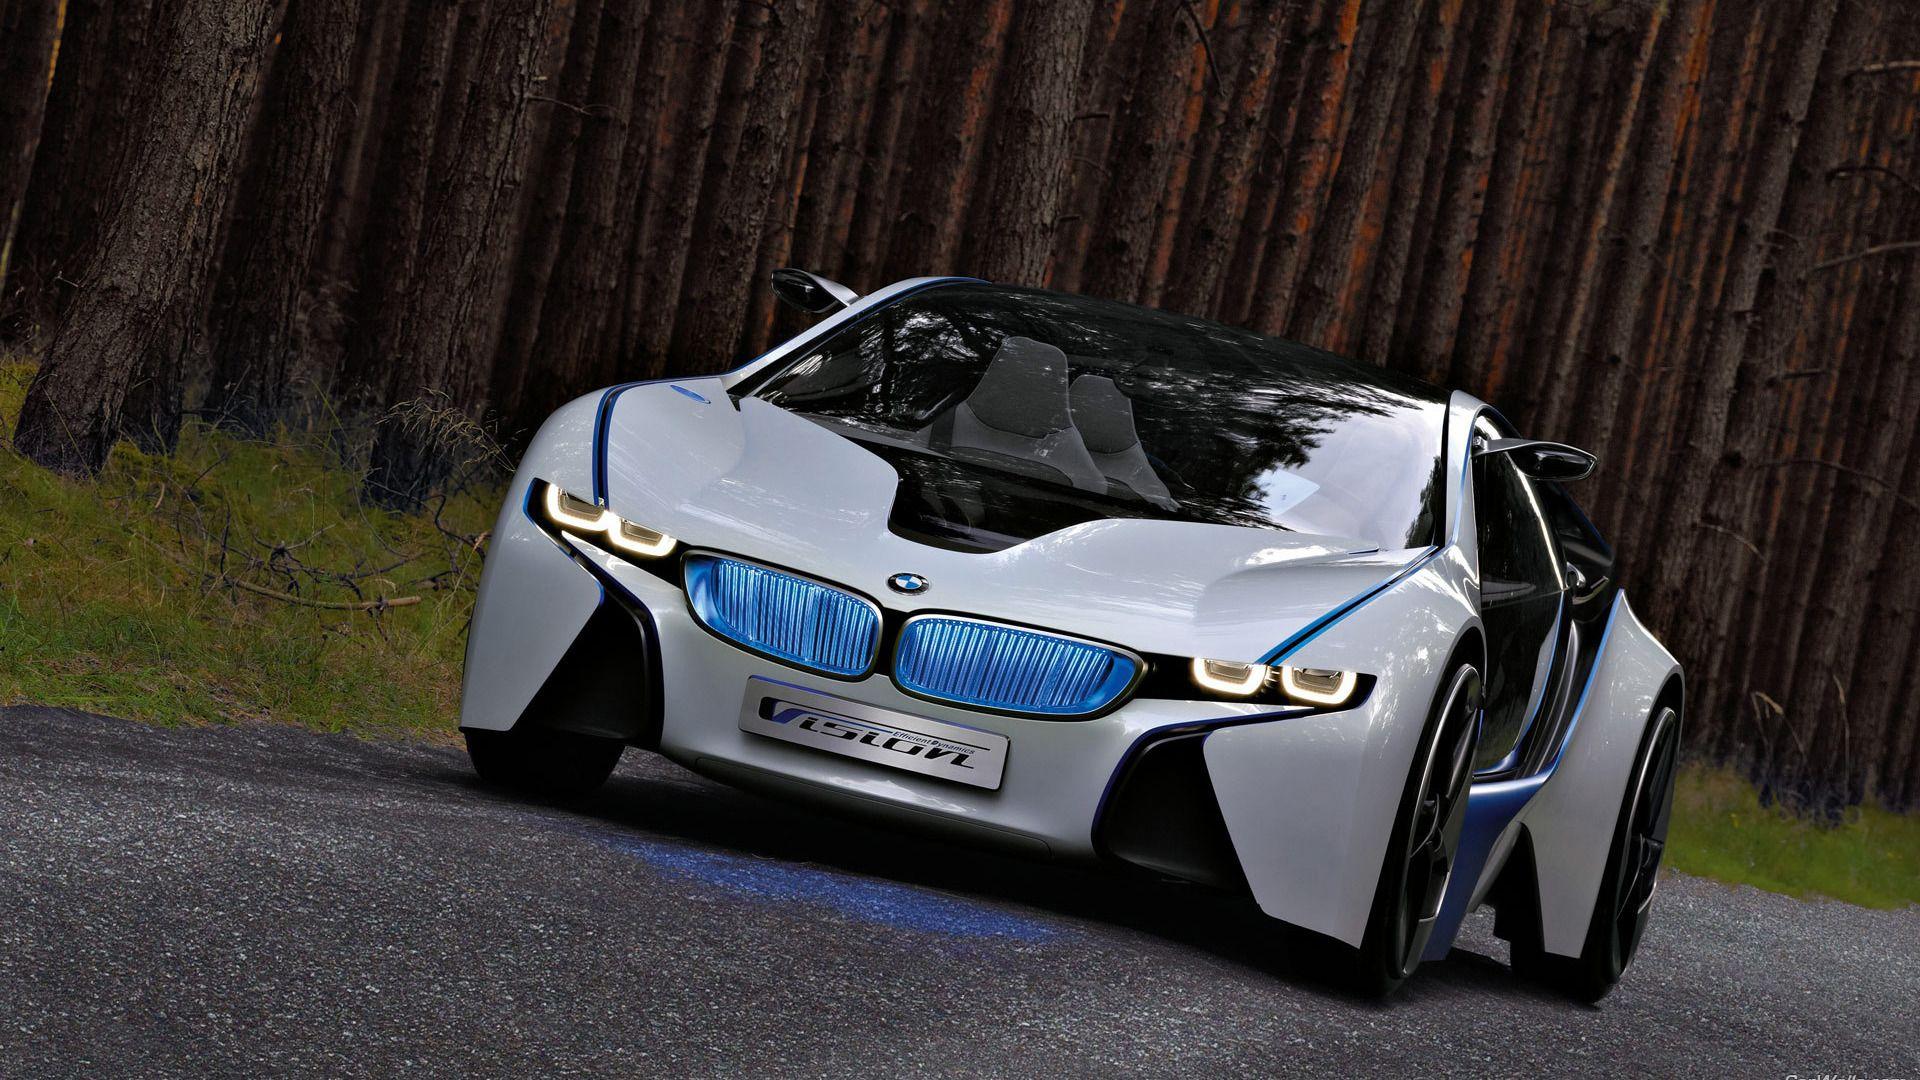 Wallpaper Cars HD Image And On Pics Of Car Bmw High Resolution